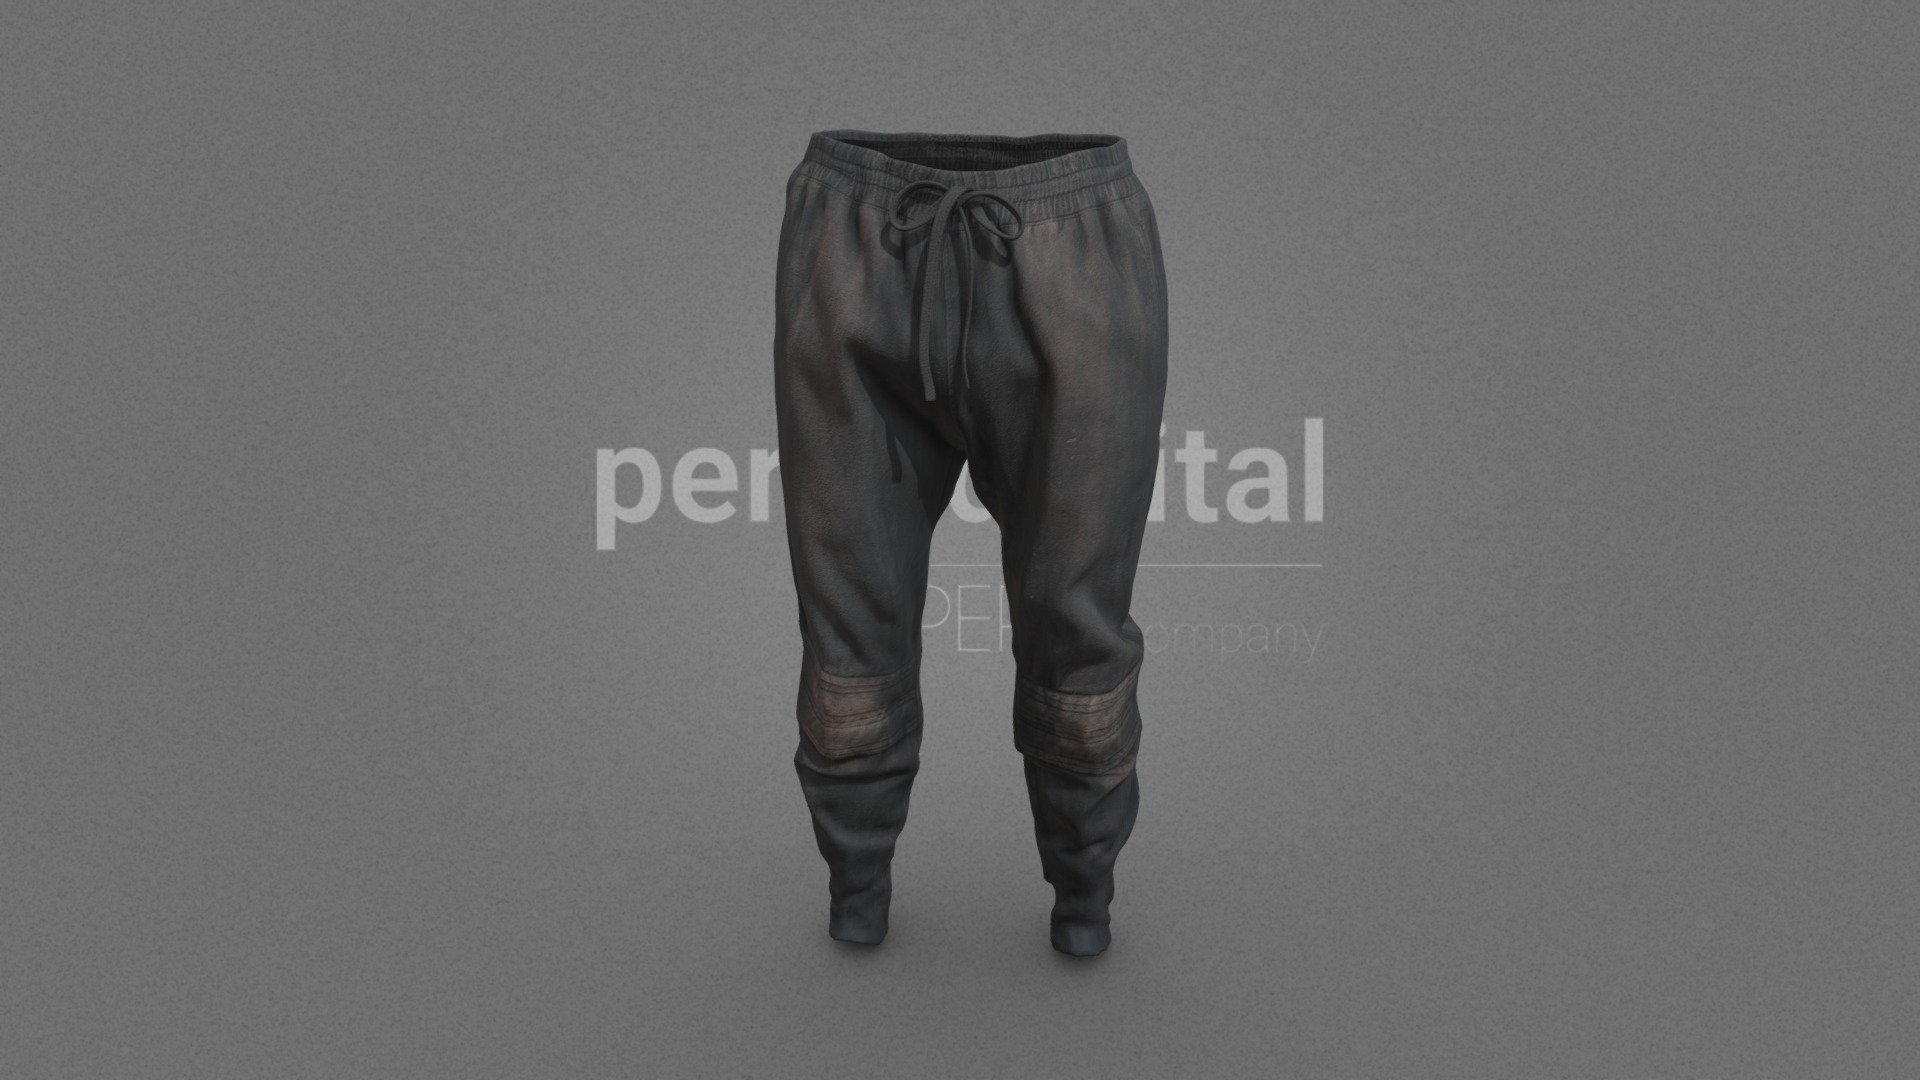 Our Wasteland Garments collection consists of several garments, which you can use in your audiovisual creations, extracted and modeled from our catalog of photogrammetry pieces.

They are optimized for use in 3D scenes of high polygonalization and optimized for rendering. We do not include characters, but they are positioned for you to include and adjust your own character. They have a model LOW (_LODRIG) inside the Blender file (included in the AdditionalFiles), which you can use for vertex weighting or cloth simulation and thus, make the transfer of vertices or property masks from the LOW to the HIGH** model.

We have included the texture maps in high resolution, as well as the Displacement maps, so you can make extreme point of view with your 3D cameras, as well as the Blender file so you can edit any aspect of the set.

Enjoy it.

Web: https://peris.digital/ - Wasteland Garment Series - Model 01 Trouser - 3D model by Peris Digital (@perisdigital) 3d model